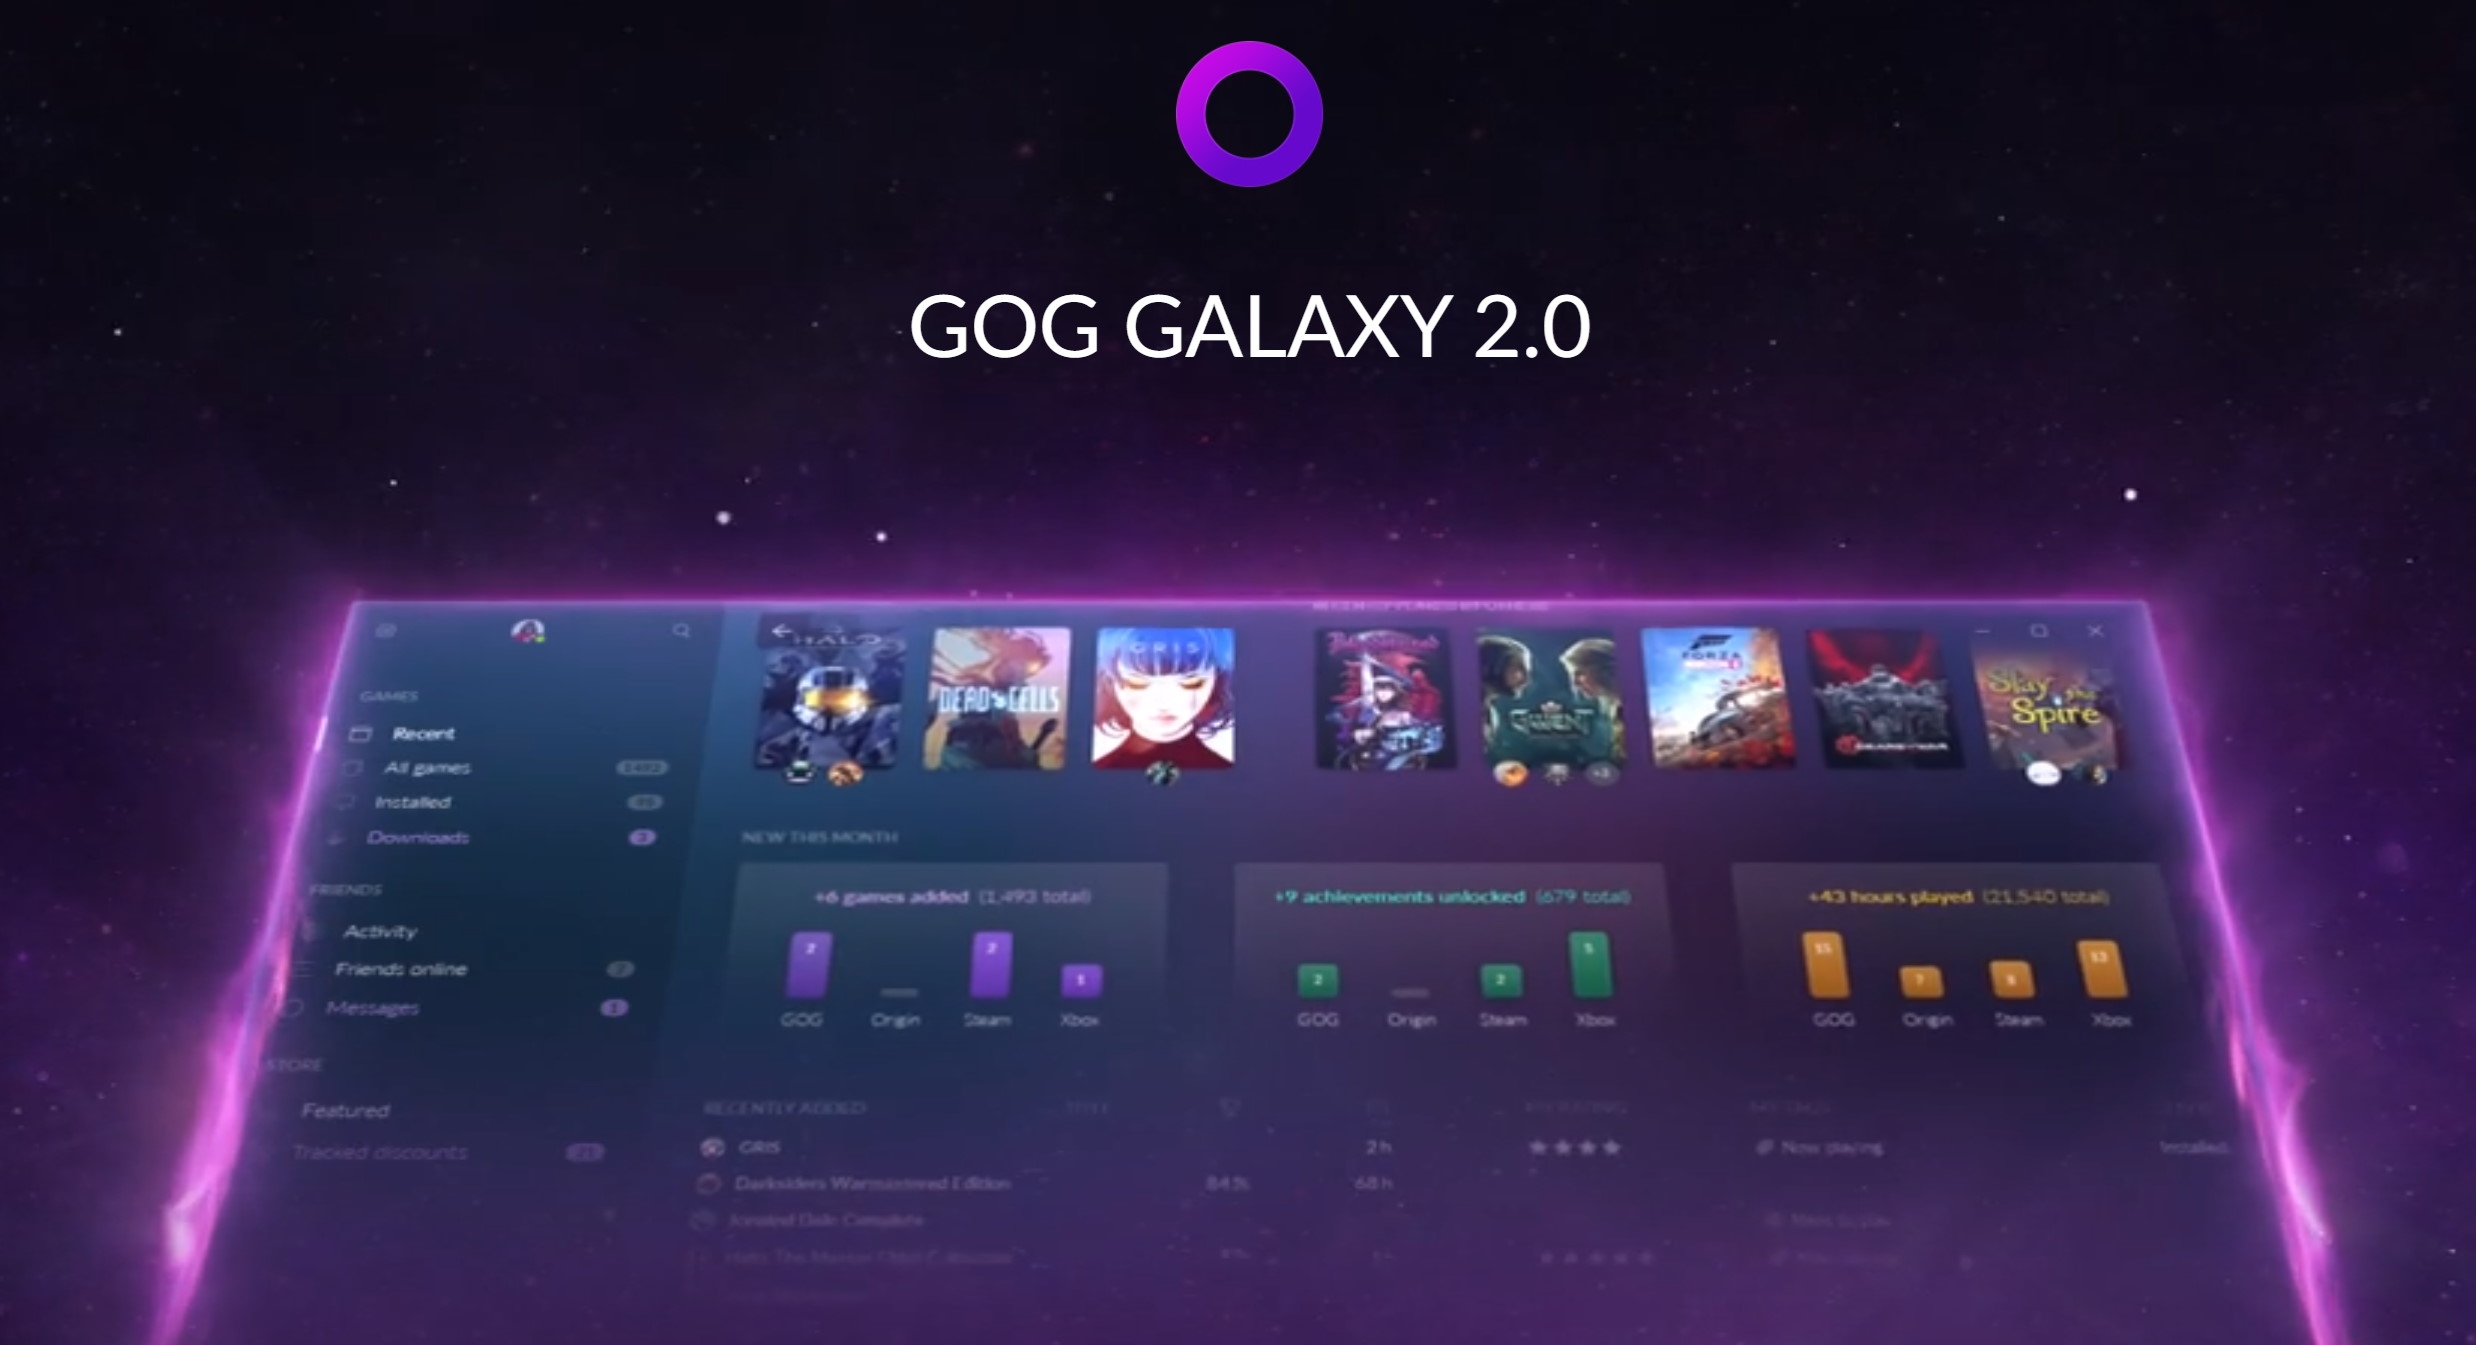 gog galaxy 2.0 time to beat